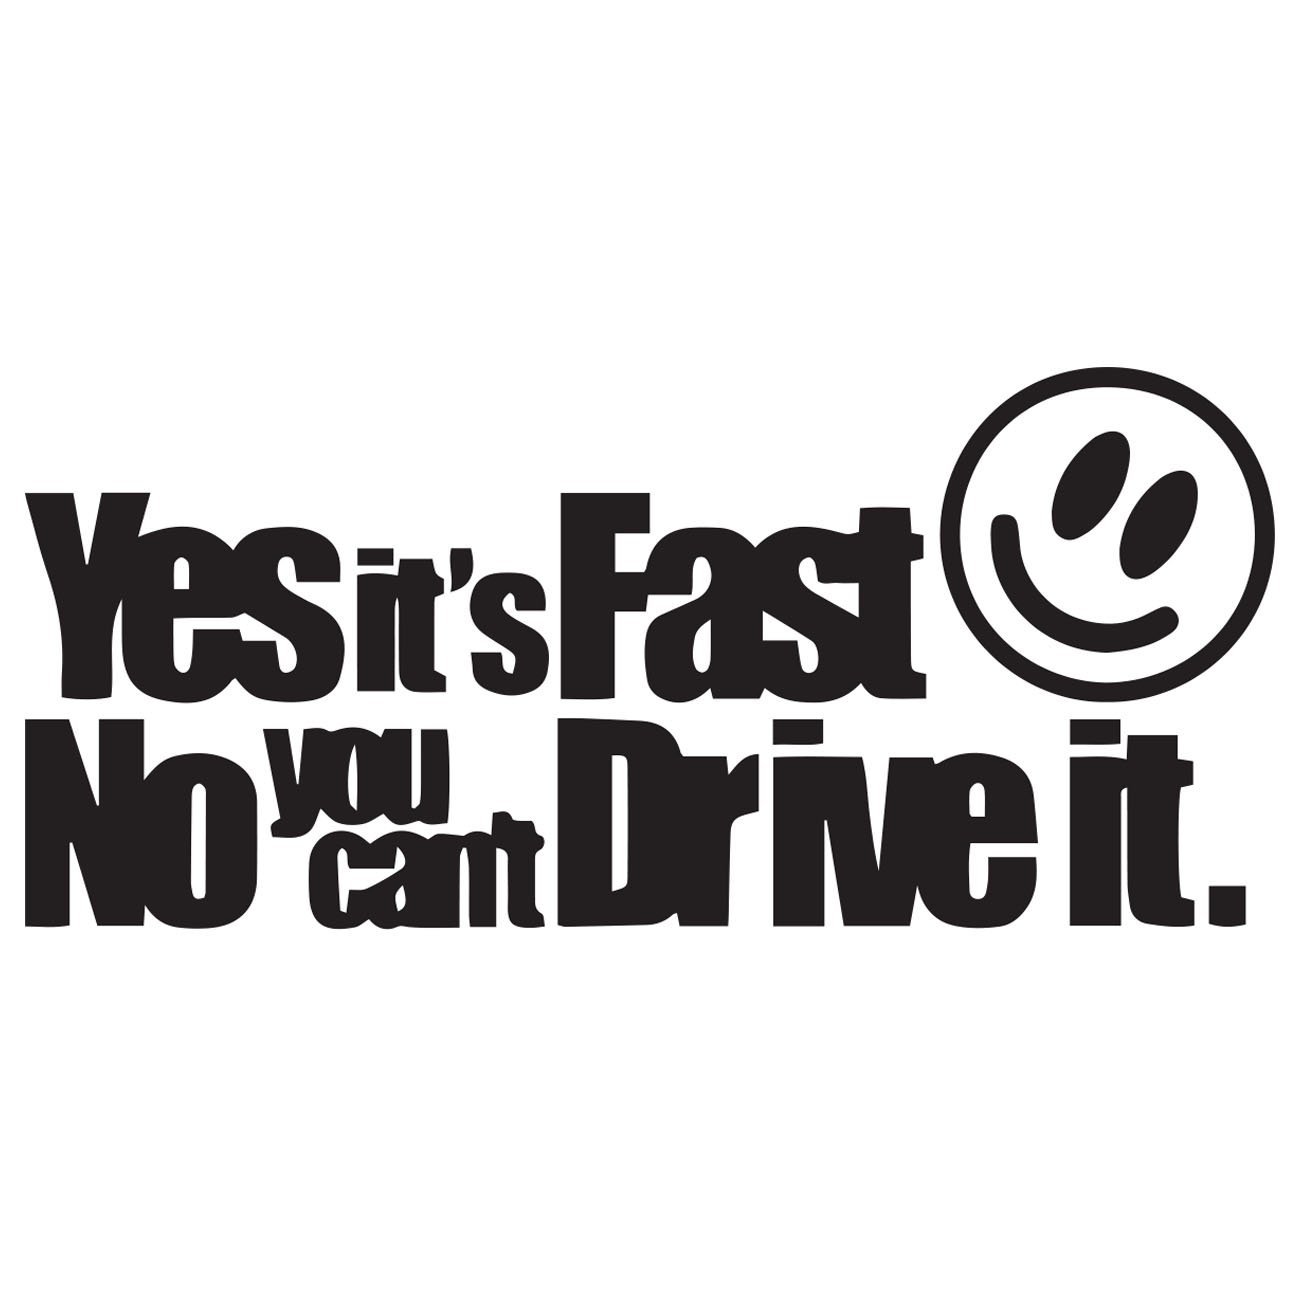 Yes its fast - no you cant drive it